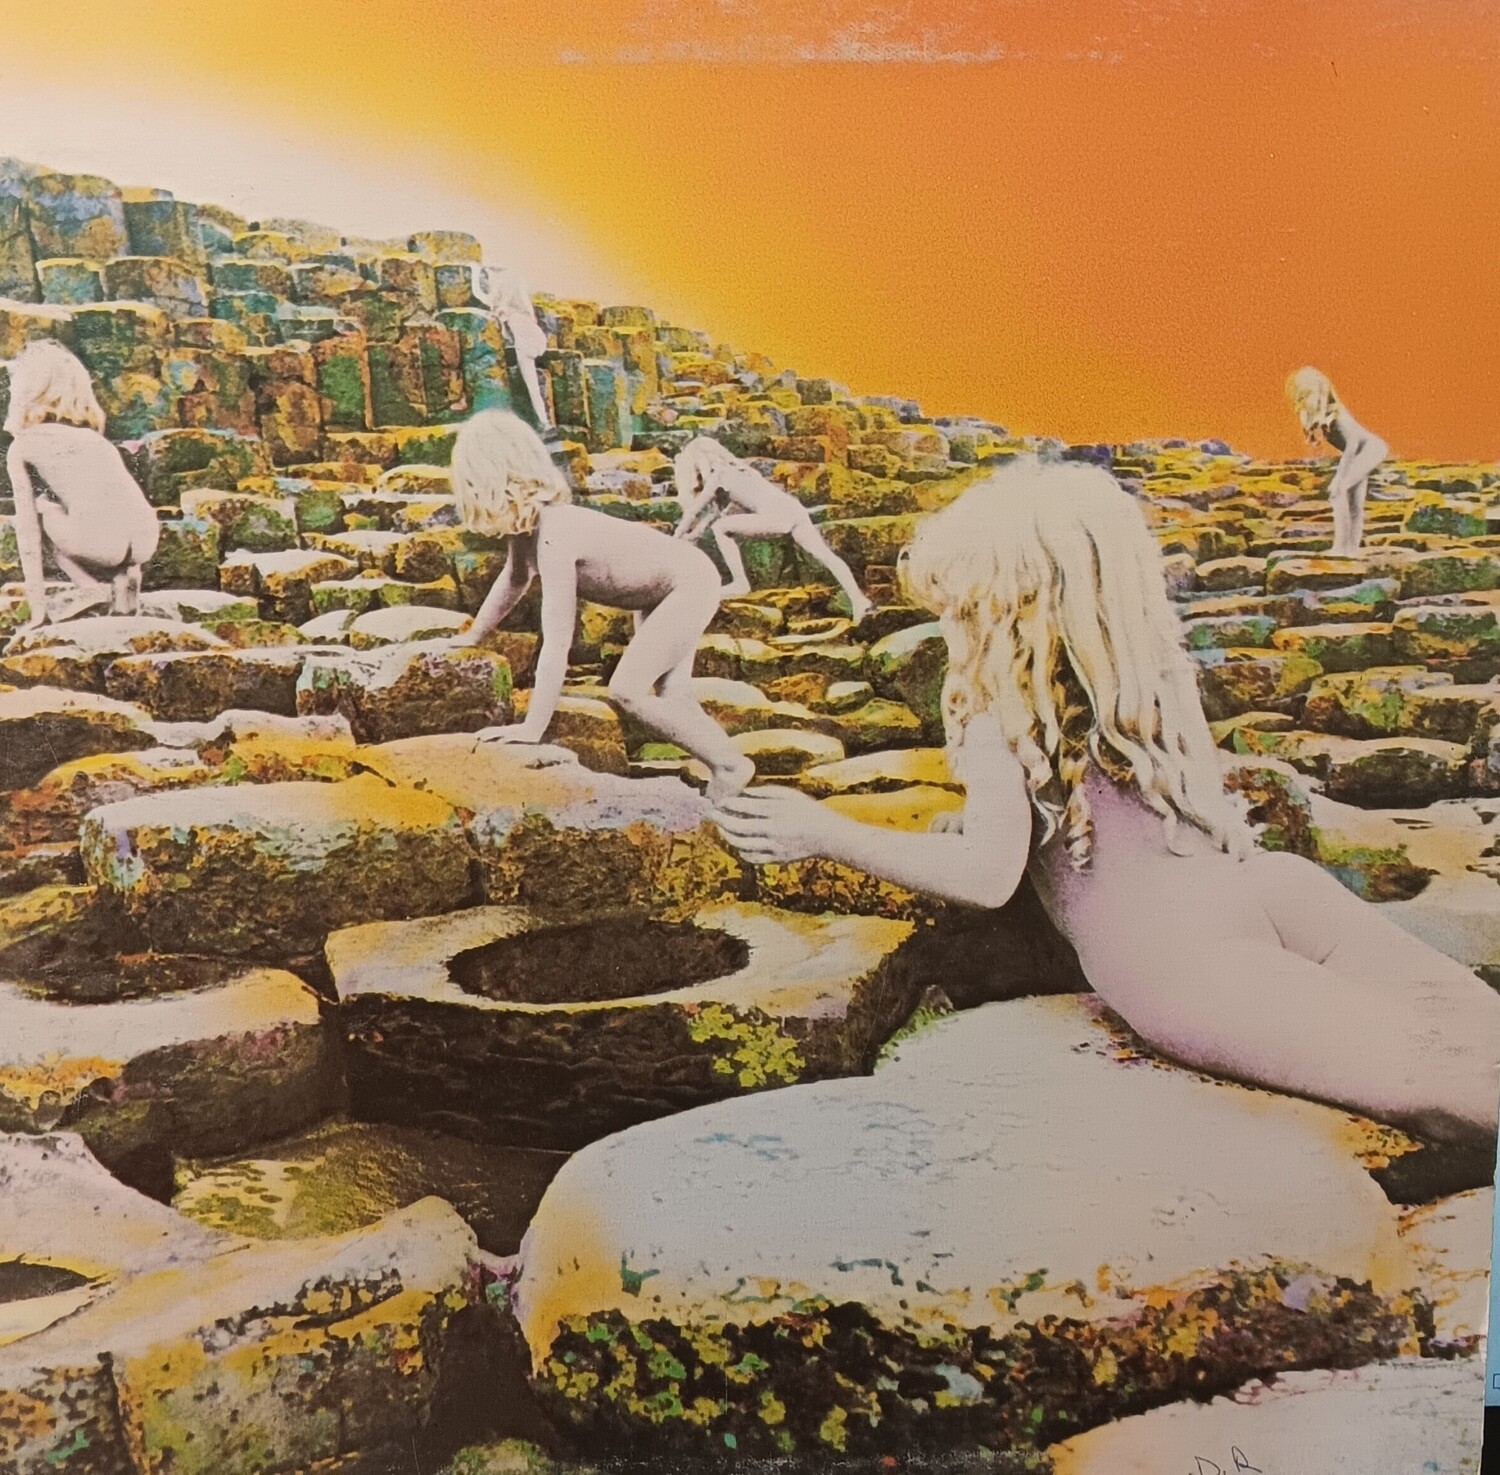 LED ZEPPELIN - Houses of the holy